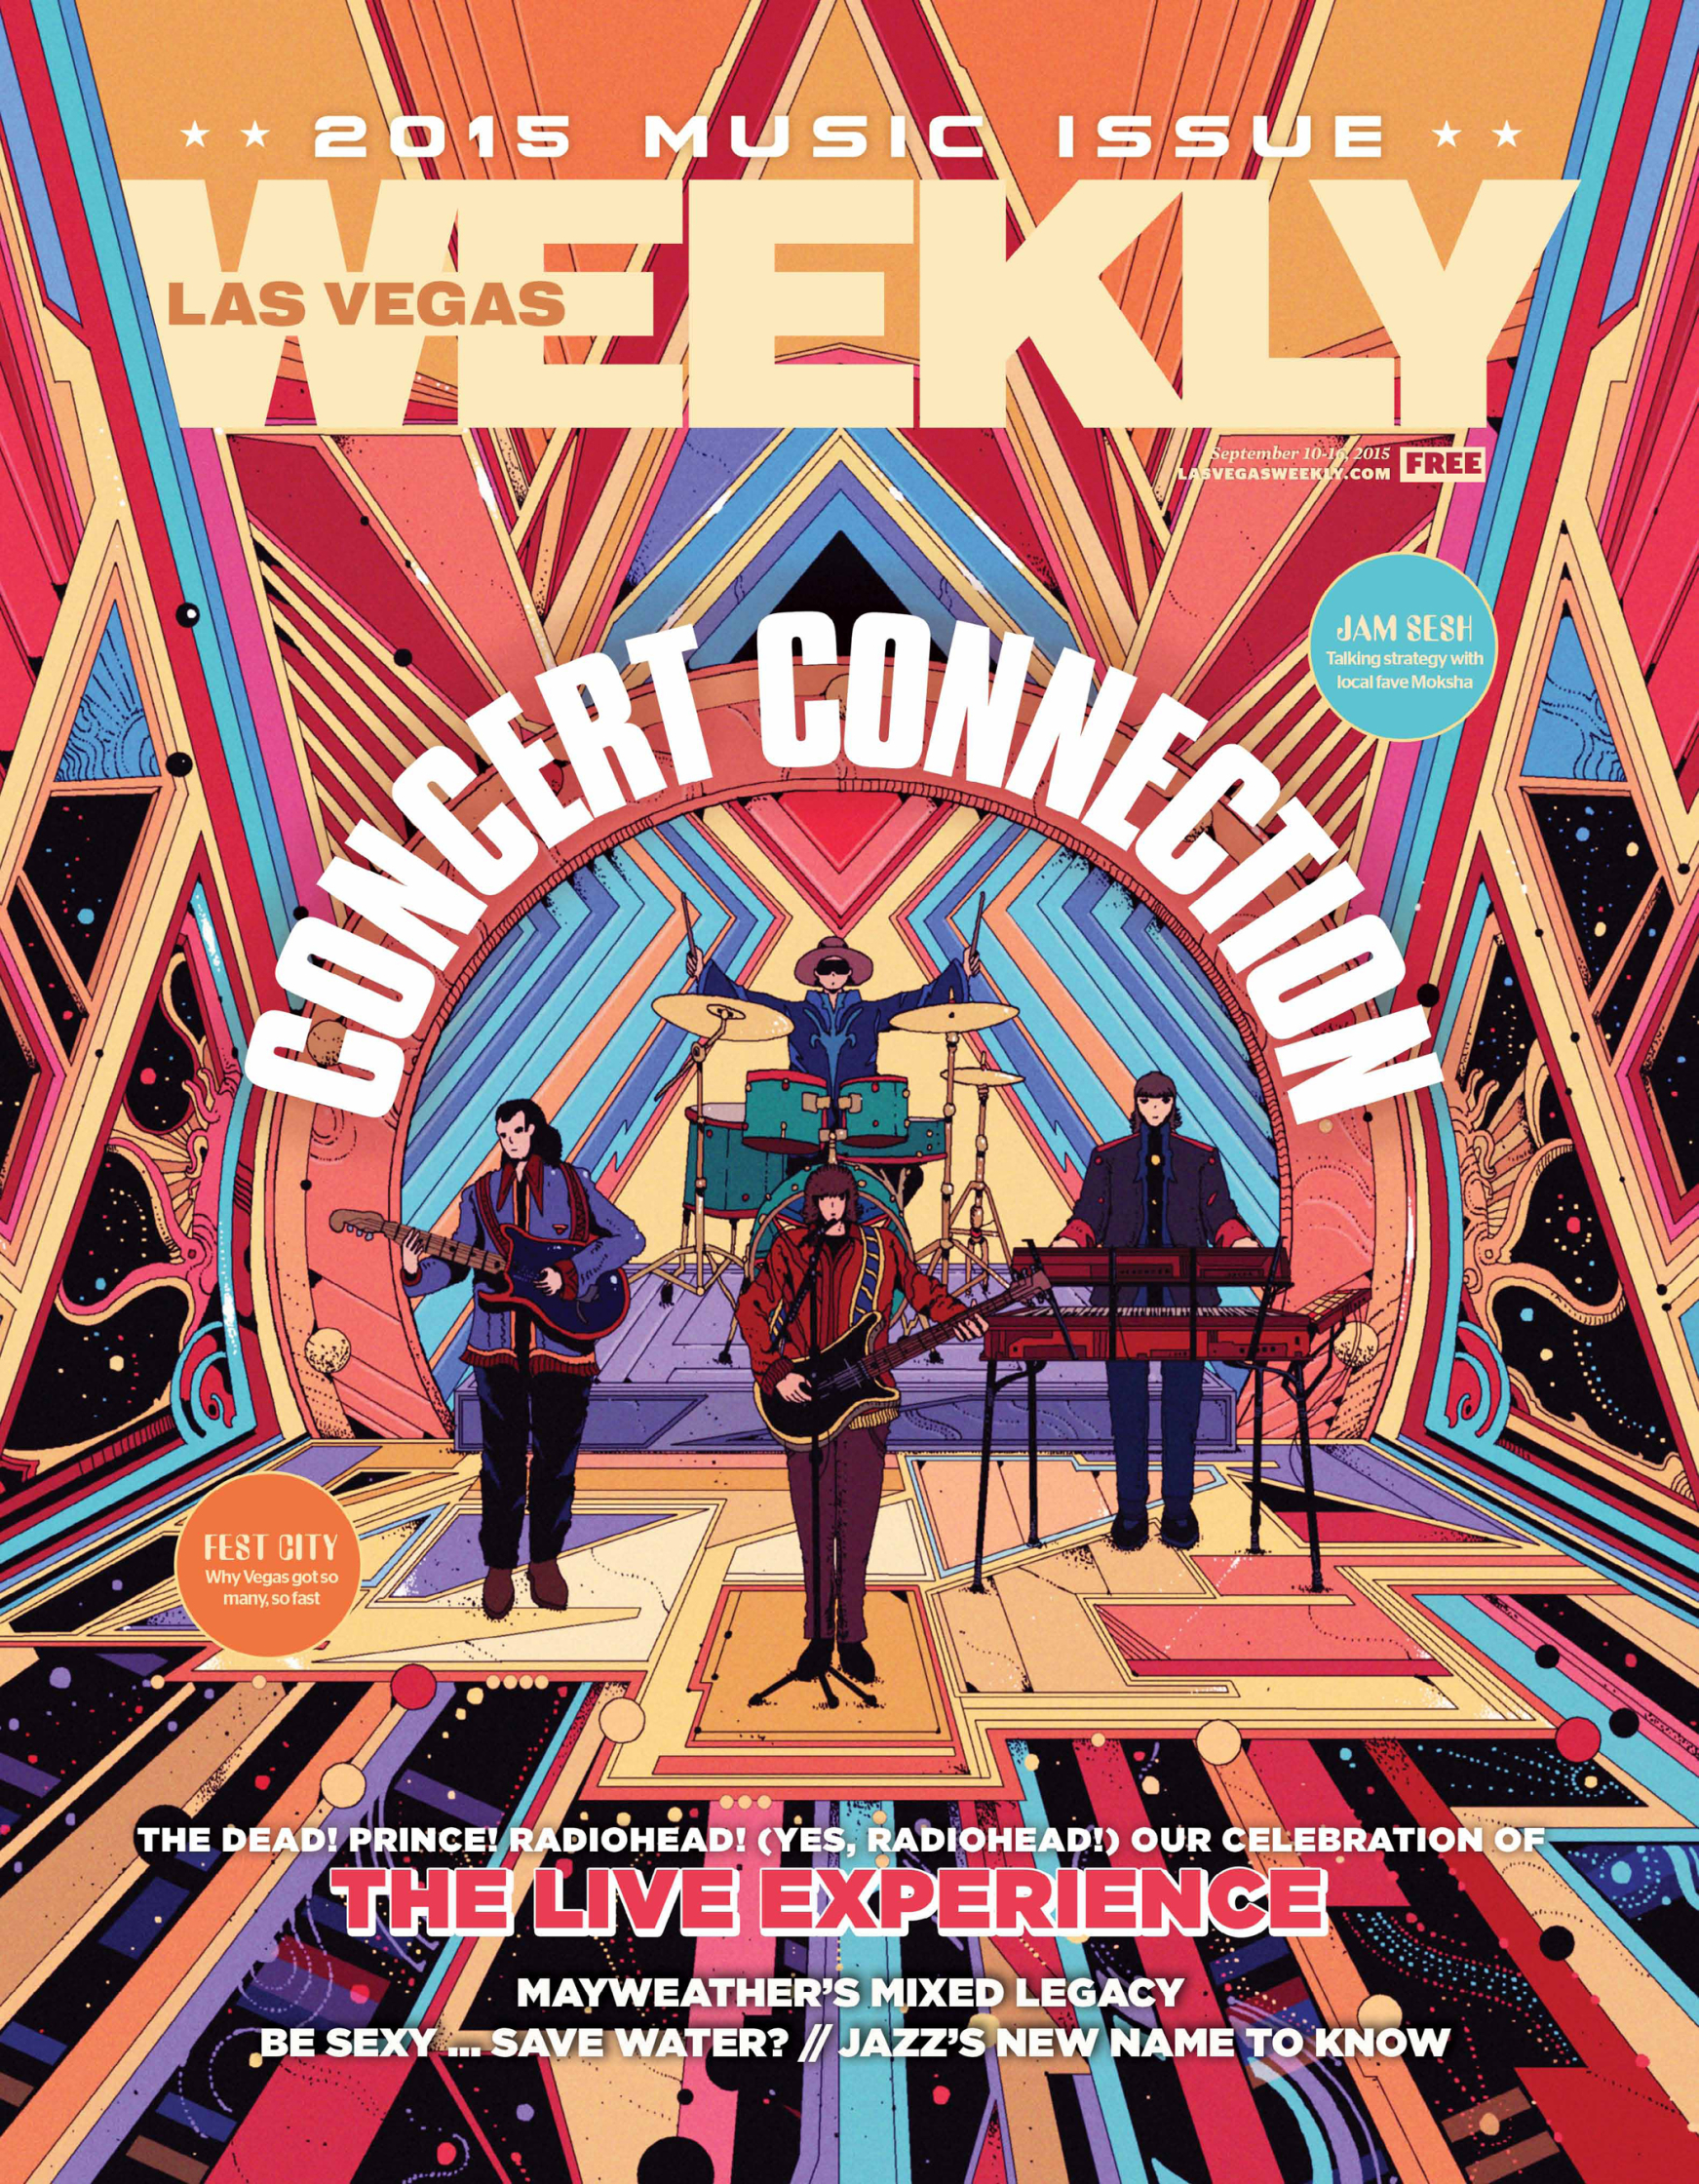 Concert Connection / Las Vegas Weekly